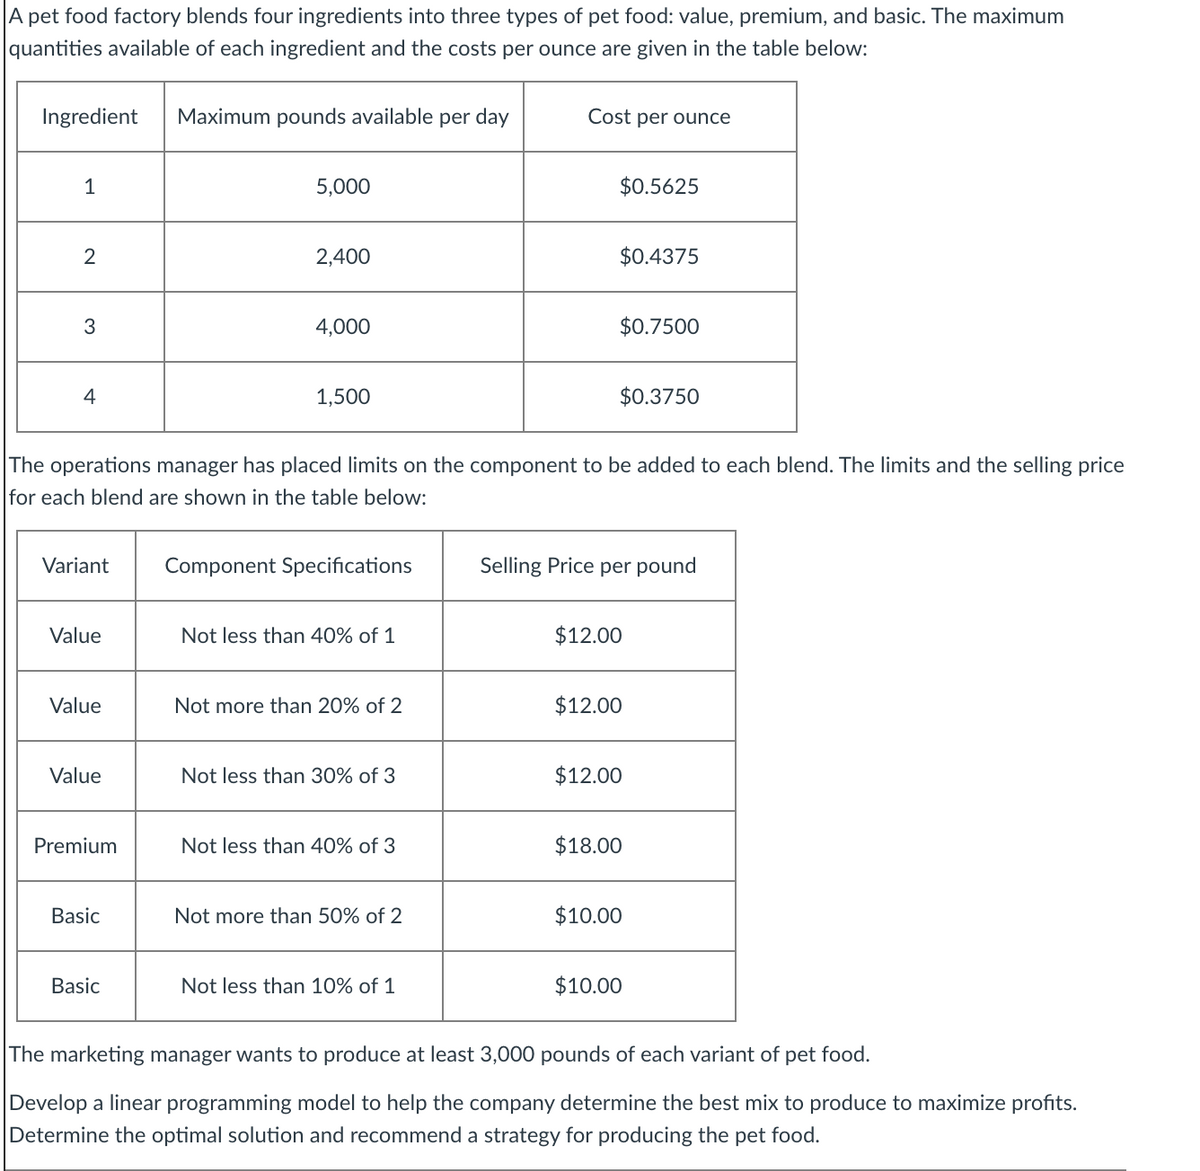 A pet food factory blends four ingredients into three types of pet food: value, premium, and basic. The maximum
quantities available of each ingredient and the costs per ounce are given in the table below:
Ingredient
Maximum pounds available per day
Cost per ounce
5,000
$0.5625
2
2,400
$0.4375
3
4,000
$0.7500
4
1,500
$0.3750
The operations manager has placed limits on the component to be added to each blend. The limits and the selling price
for each blend are shown in the table below:
Variant
Component Specifications
Selling Price per pound
Value
Not less than 40% of 1
$12.00
Value
Not more than 20% of 2
$12.00
Value
Not less than 30% of 3
$12.00
Premium
Not less than 40% of 3
$18.00
Basic
Not more than 50% of 2
$10.00
Basic
Not less than 10% of 1
$10.00
The marketing manager wants to produce at least 3,000 pounds of each variant of pet food.
Develop a linear programming model to help the company determine the best mix to produce to maximize profits.
Determine the optimal solution and recommend a strategy for producing the pet food.
